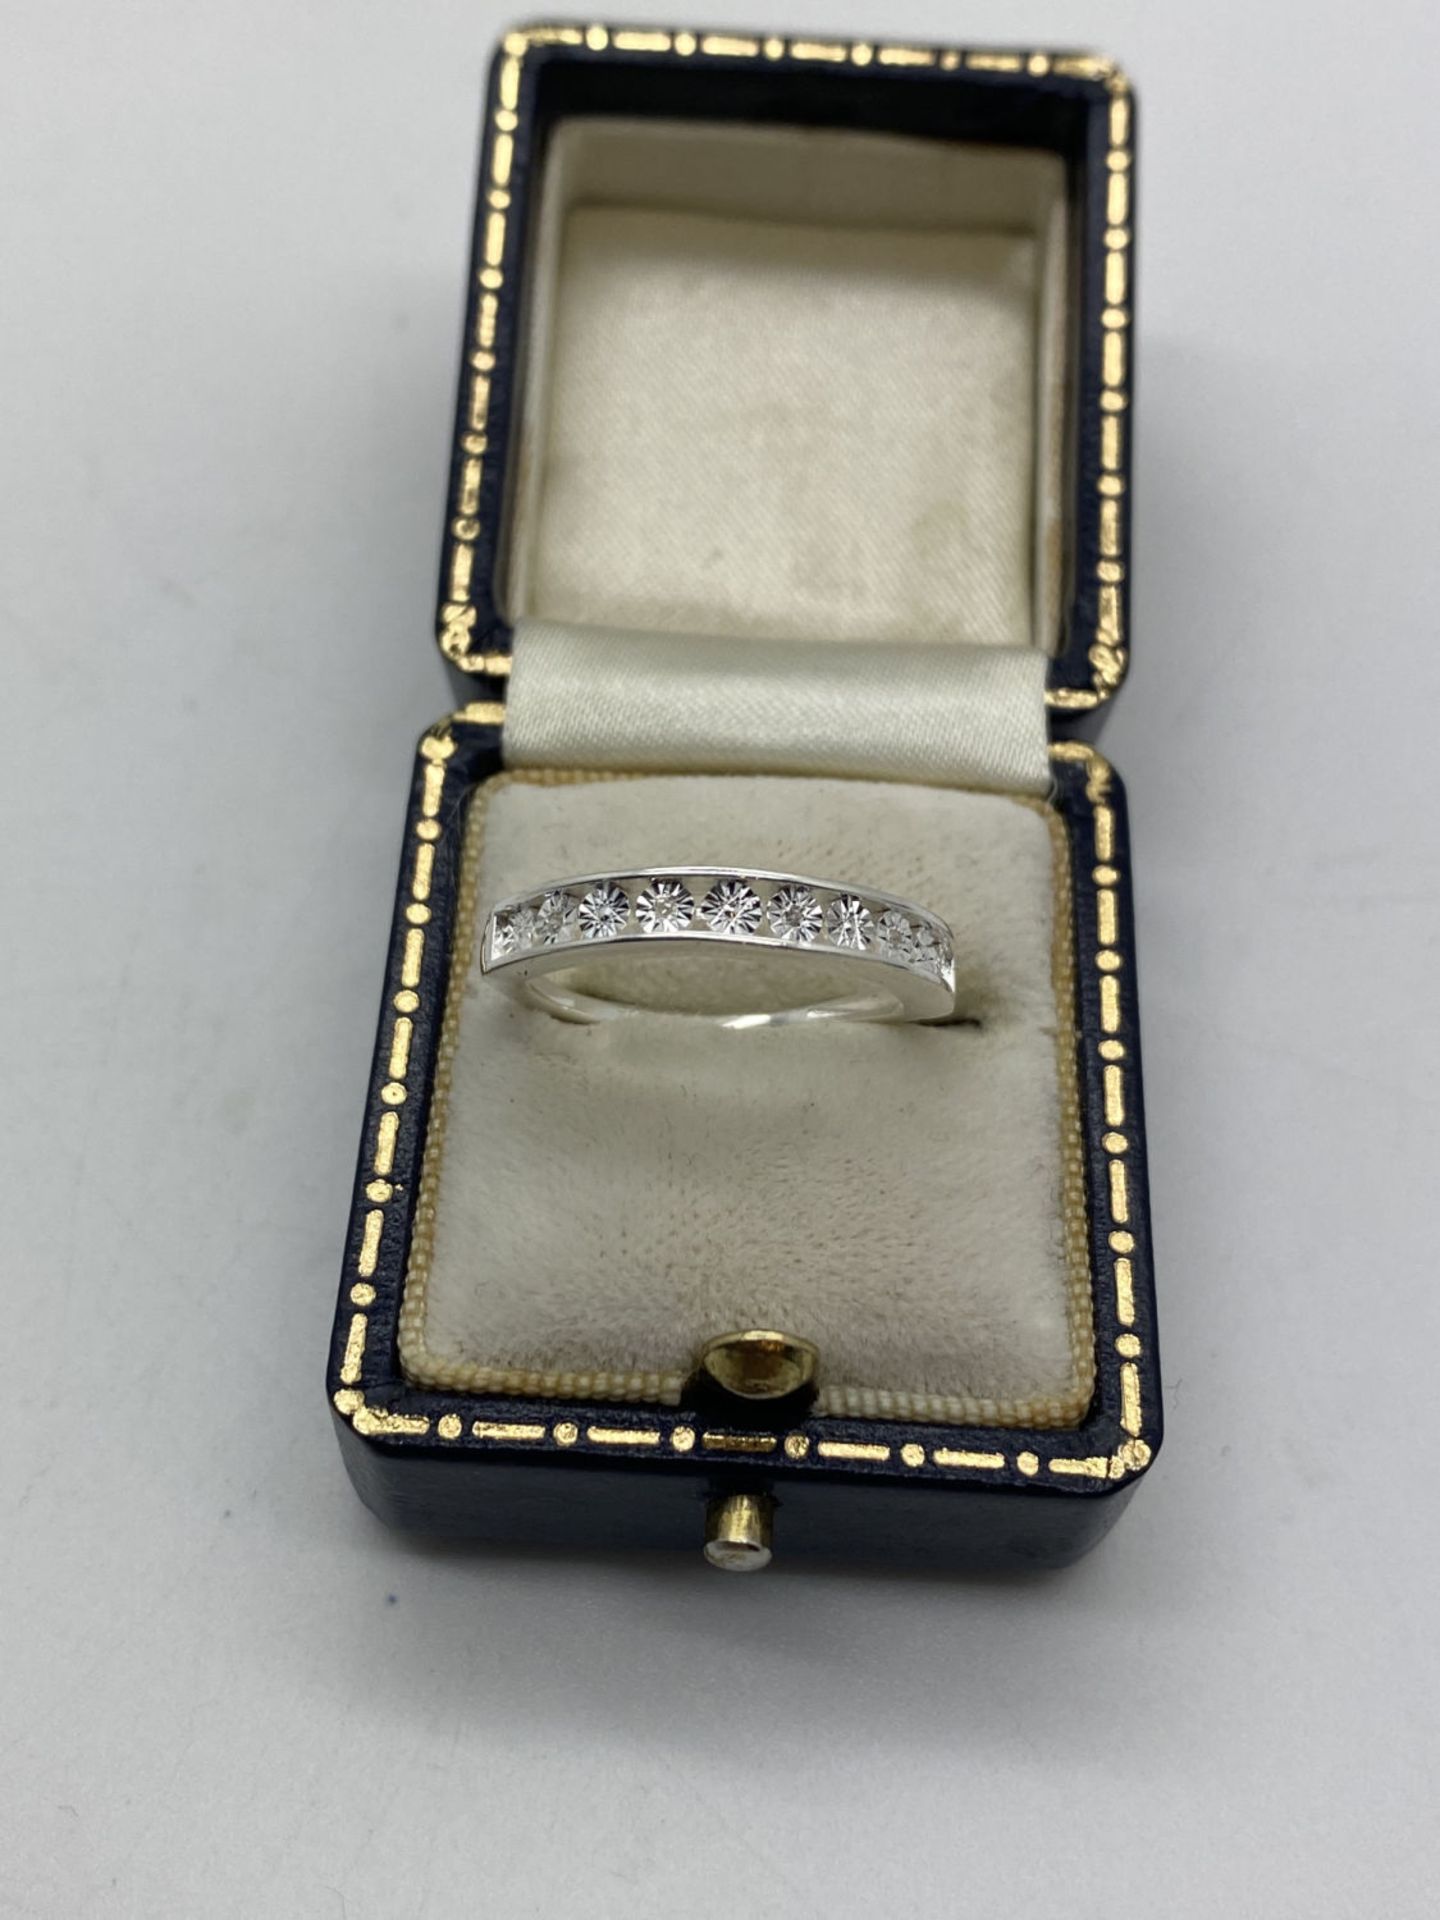 ILLUSION SET DIAMOND HALF ETERNITY RING SET IN 925 SILVER APPROX RING SIZE N - Image 2 of 2